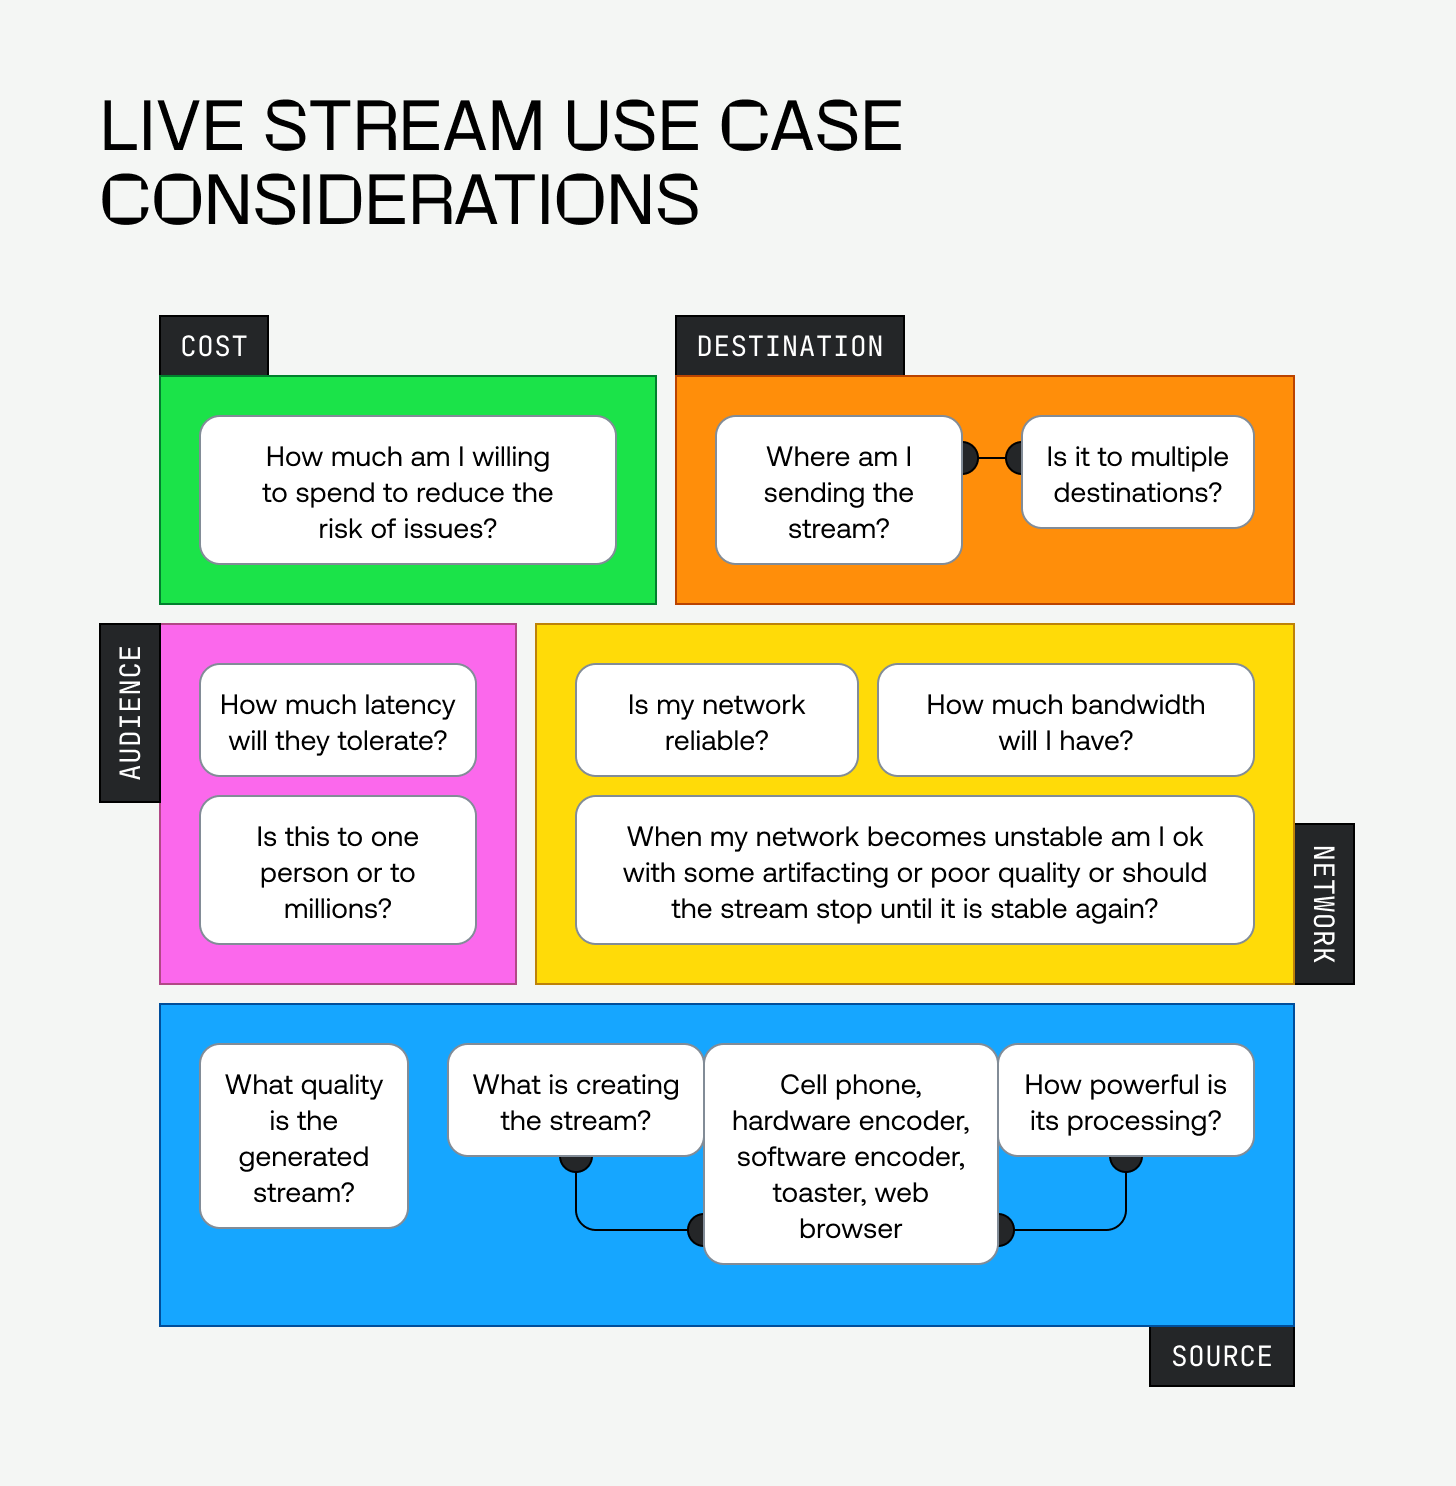 A diagram with "Live stream use case considerations" as the title. The considerations and questions to ask are listed below. They are:  Network -- How much bandwidth will I have? Is my network reliable? When my network becomes unstable am I ok with some artifacting or poor quality or should the stream stop until it is stable again? Source -- What is creating the stream?  Cell Phone, Hardware Encoder, Software Encoder, Toaster, Web Browser  How powerful is its processing?  What quality is the generated stream? Destination -- Where am I sending the stream?  Is it to multiple destinations? Audience -- How much latency will they tolerate? Is this to one person or to millions? Cost -- How much am I willing to spend to reduce risk of issues?